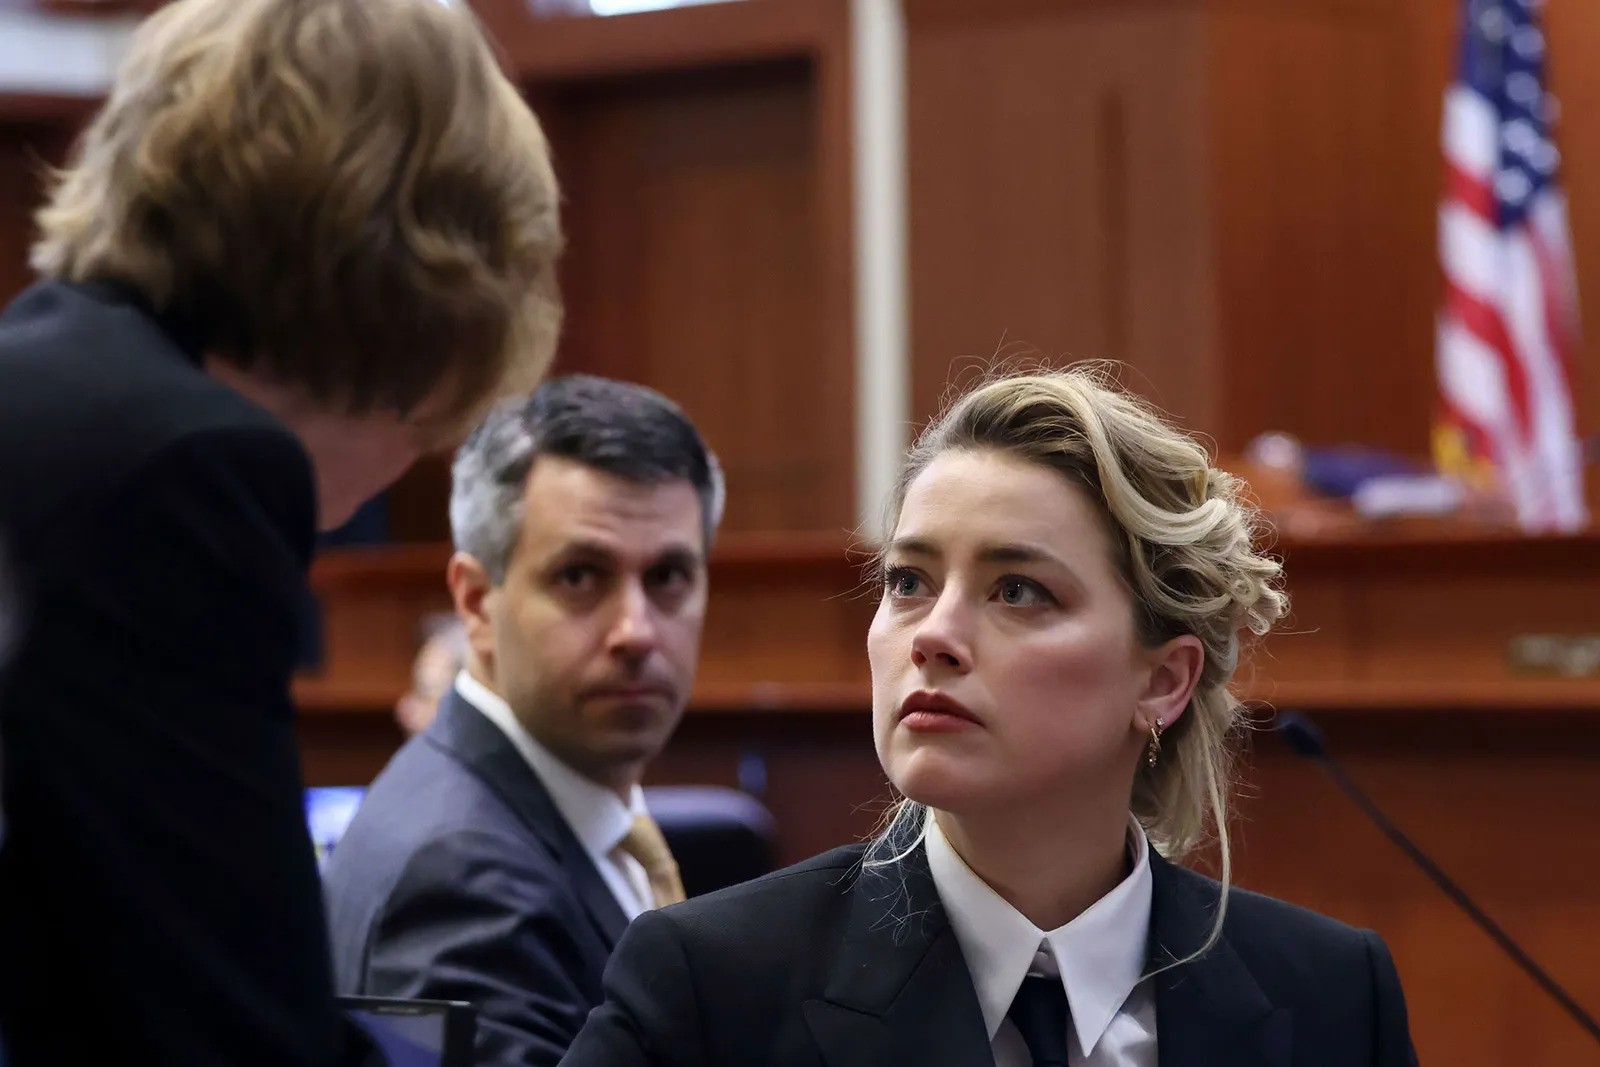 Amber Heard at court during the Depp vs Heard trial